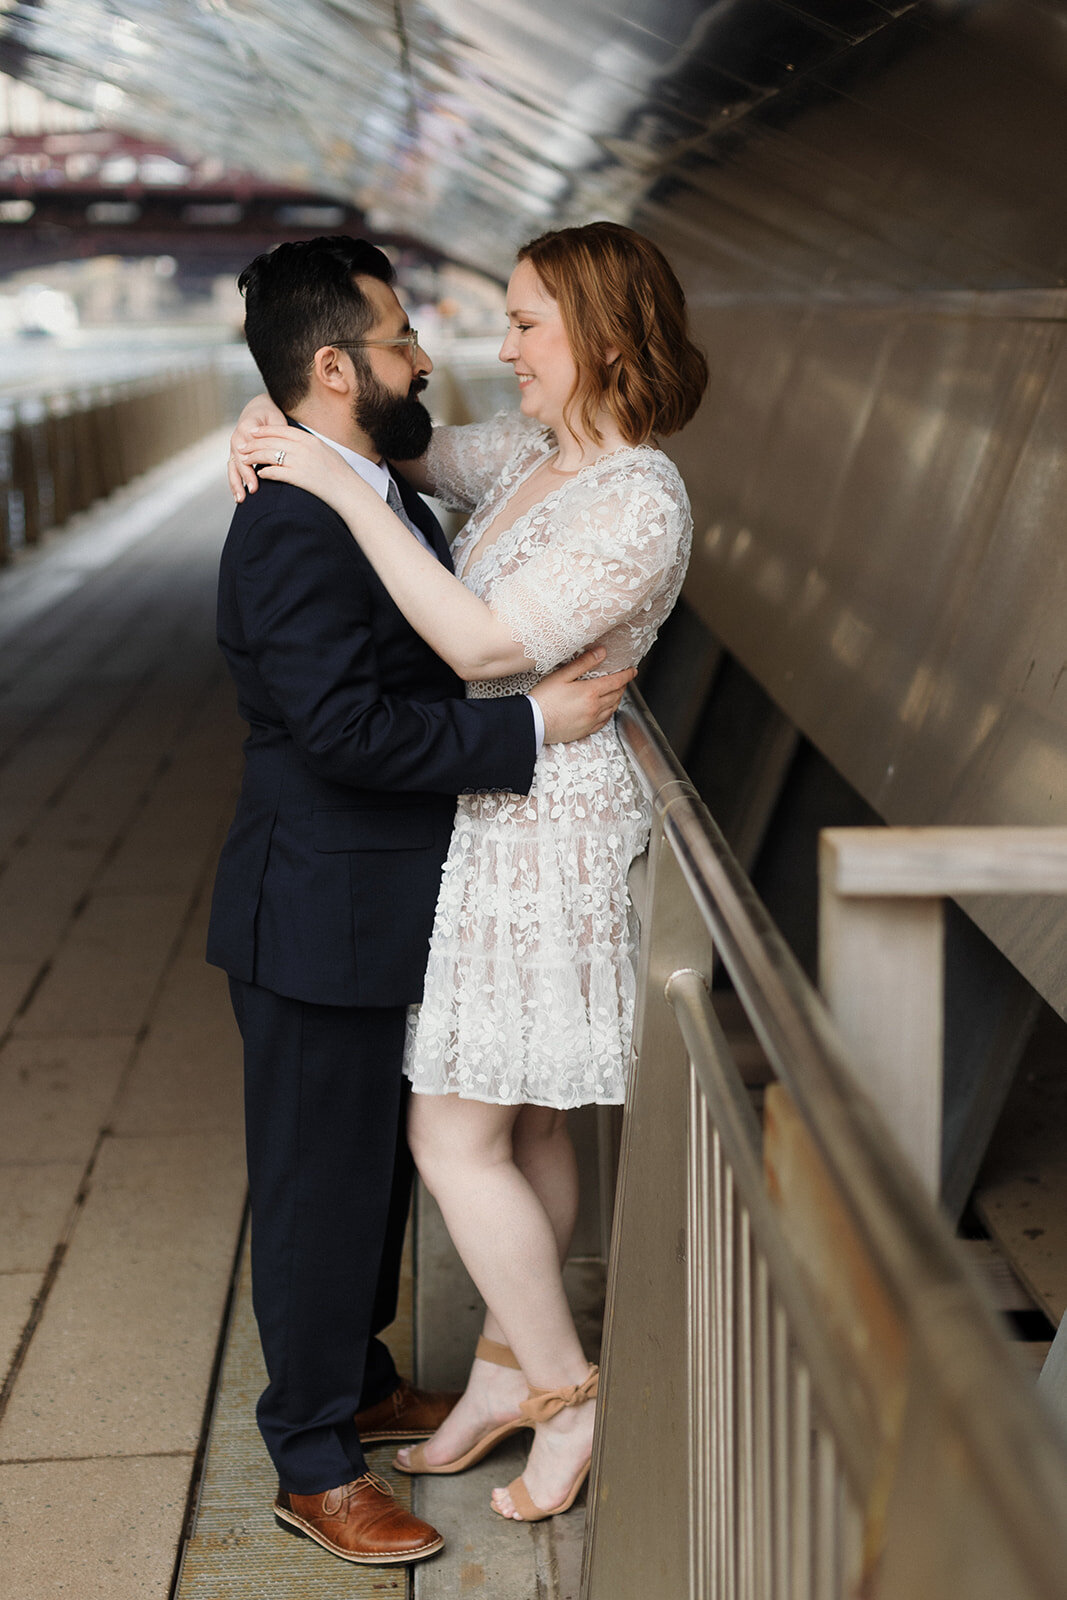 Wedding couple embraces while standing under Chicago River bridge. Bride leans against a rail while groom embraces her.